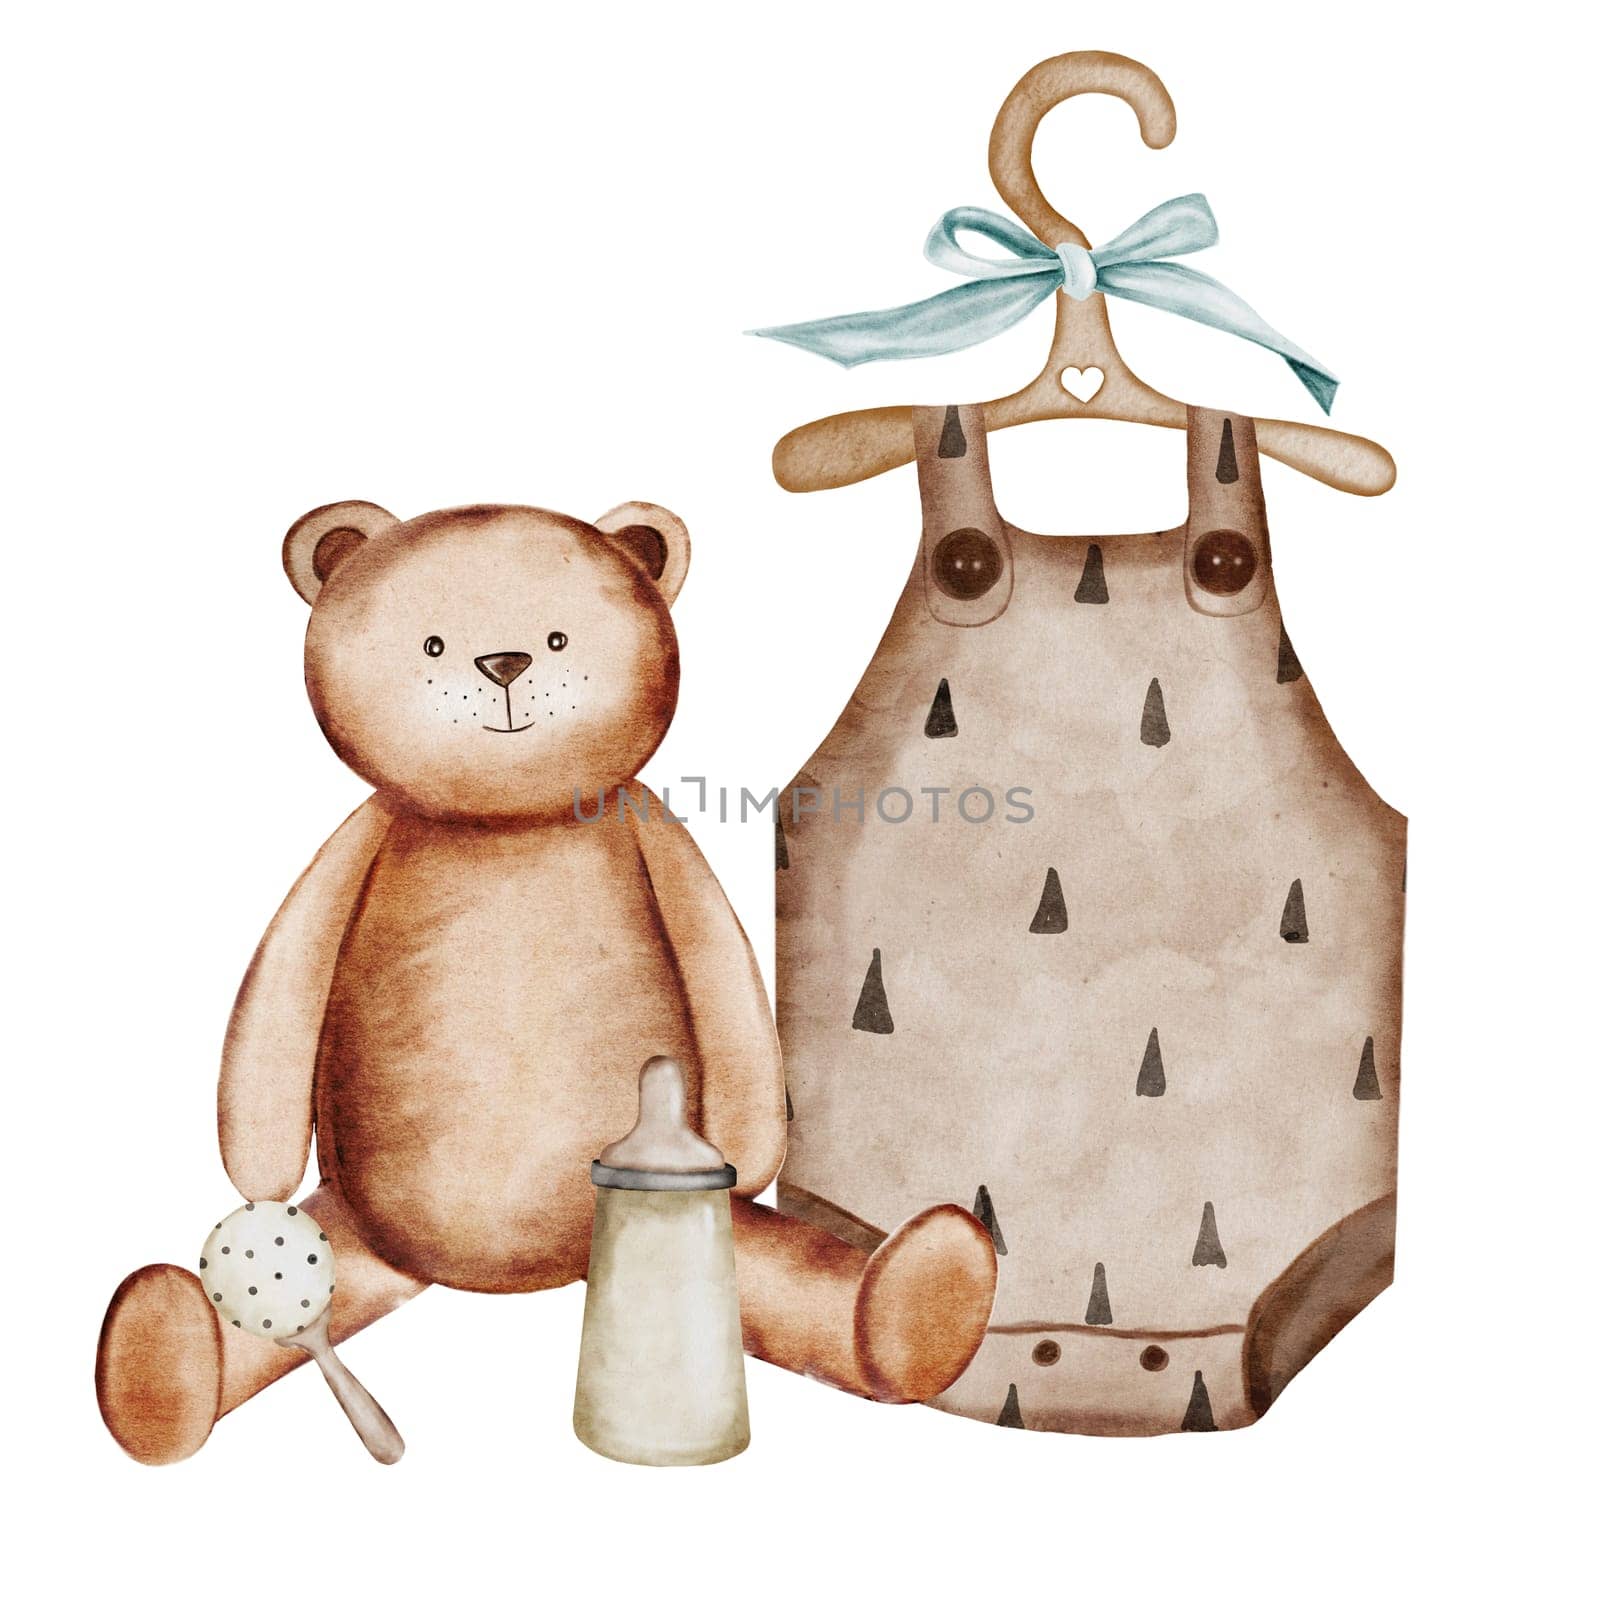 Baby shower watercolor invitation card. Composition of children's clothes on a hanger, a teddy bear and a bottle of rattle. Ideal for baby shower cards, clothing store tags, logos. High quality illustration